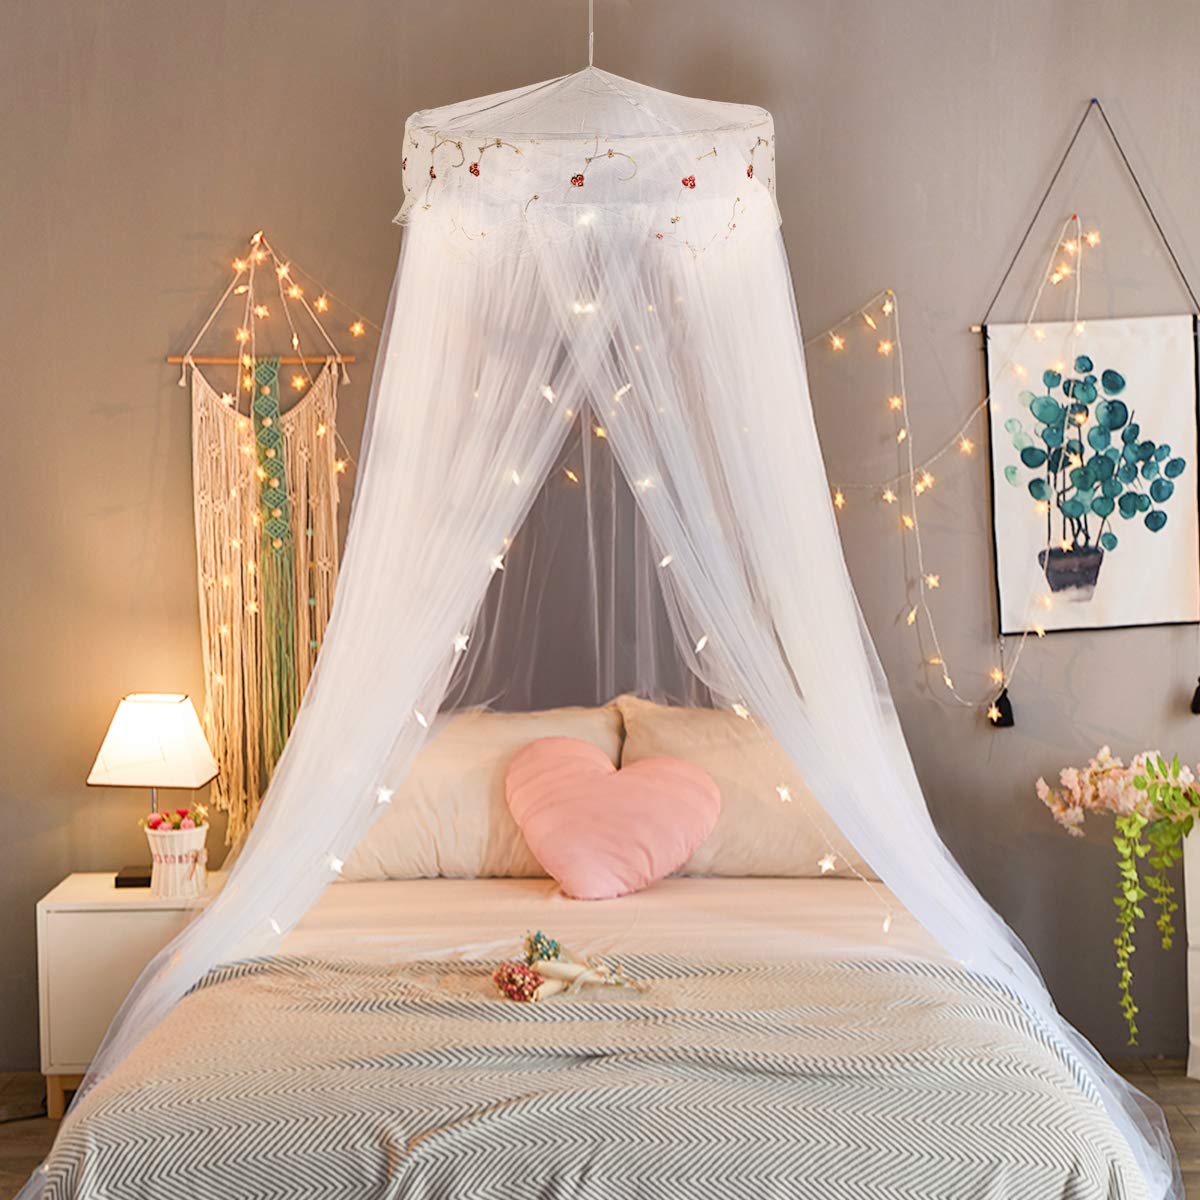 Jeteventy Bed Canopy, Princess Bed Curtain Net for Single to King Size,Bedroom Decoration of Round Lace Dome with Stainless Steel Hook,Quick Easy Installation (White)